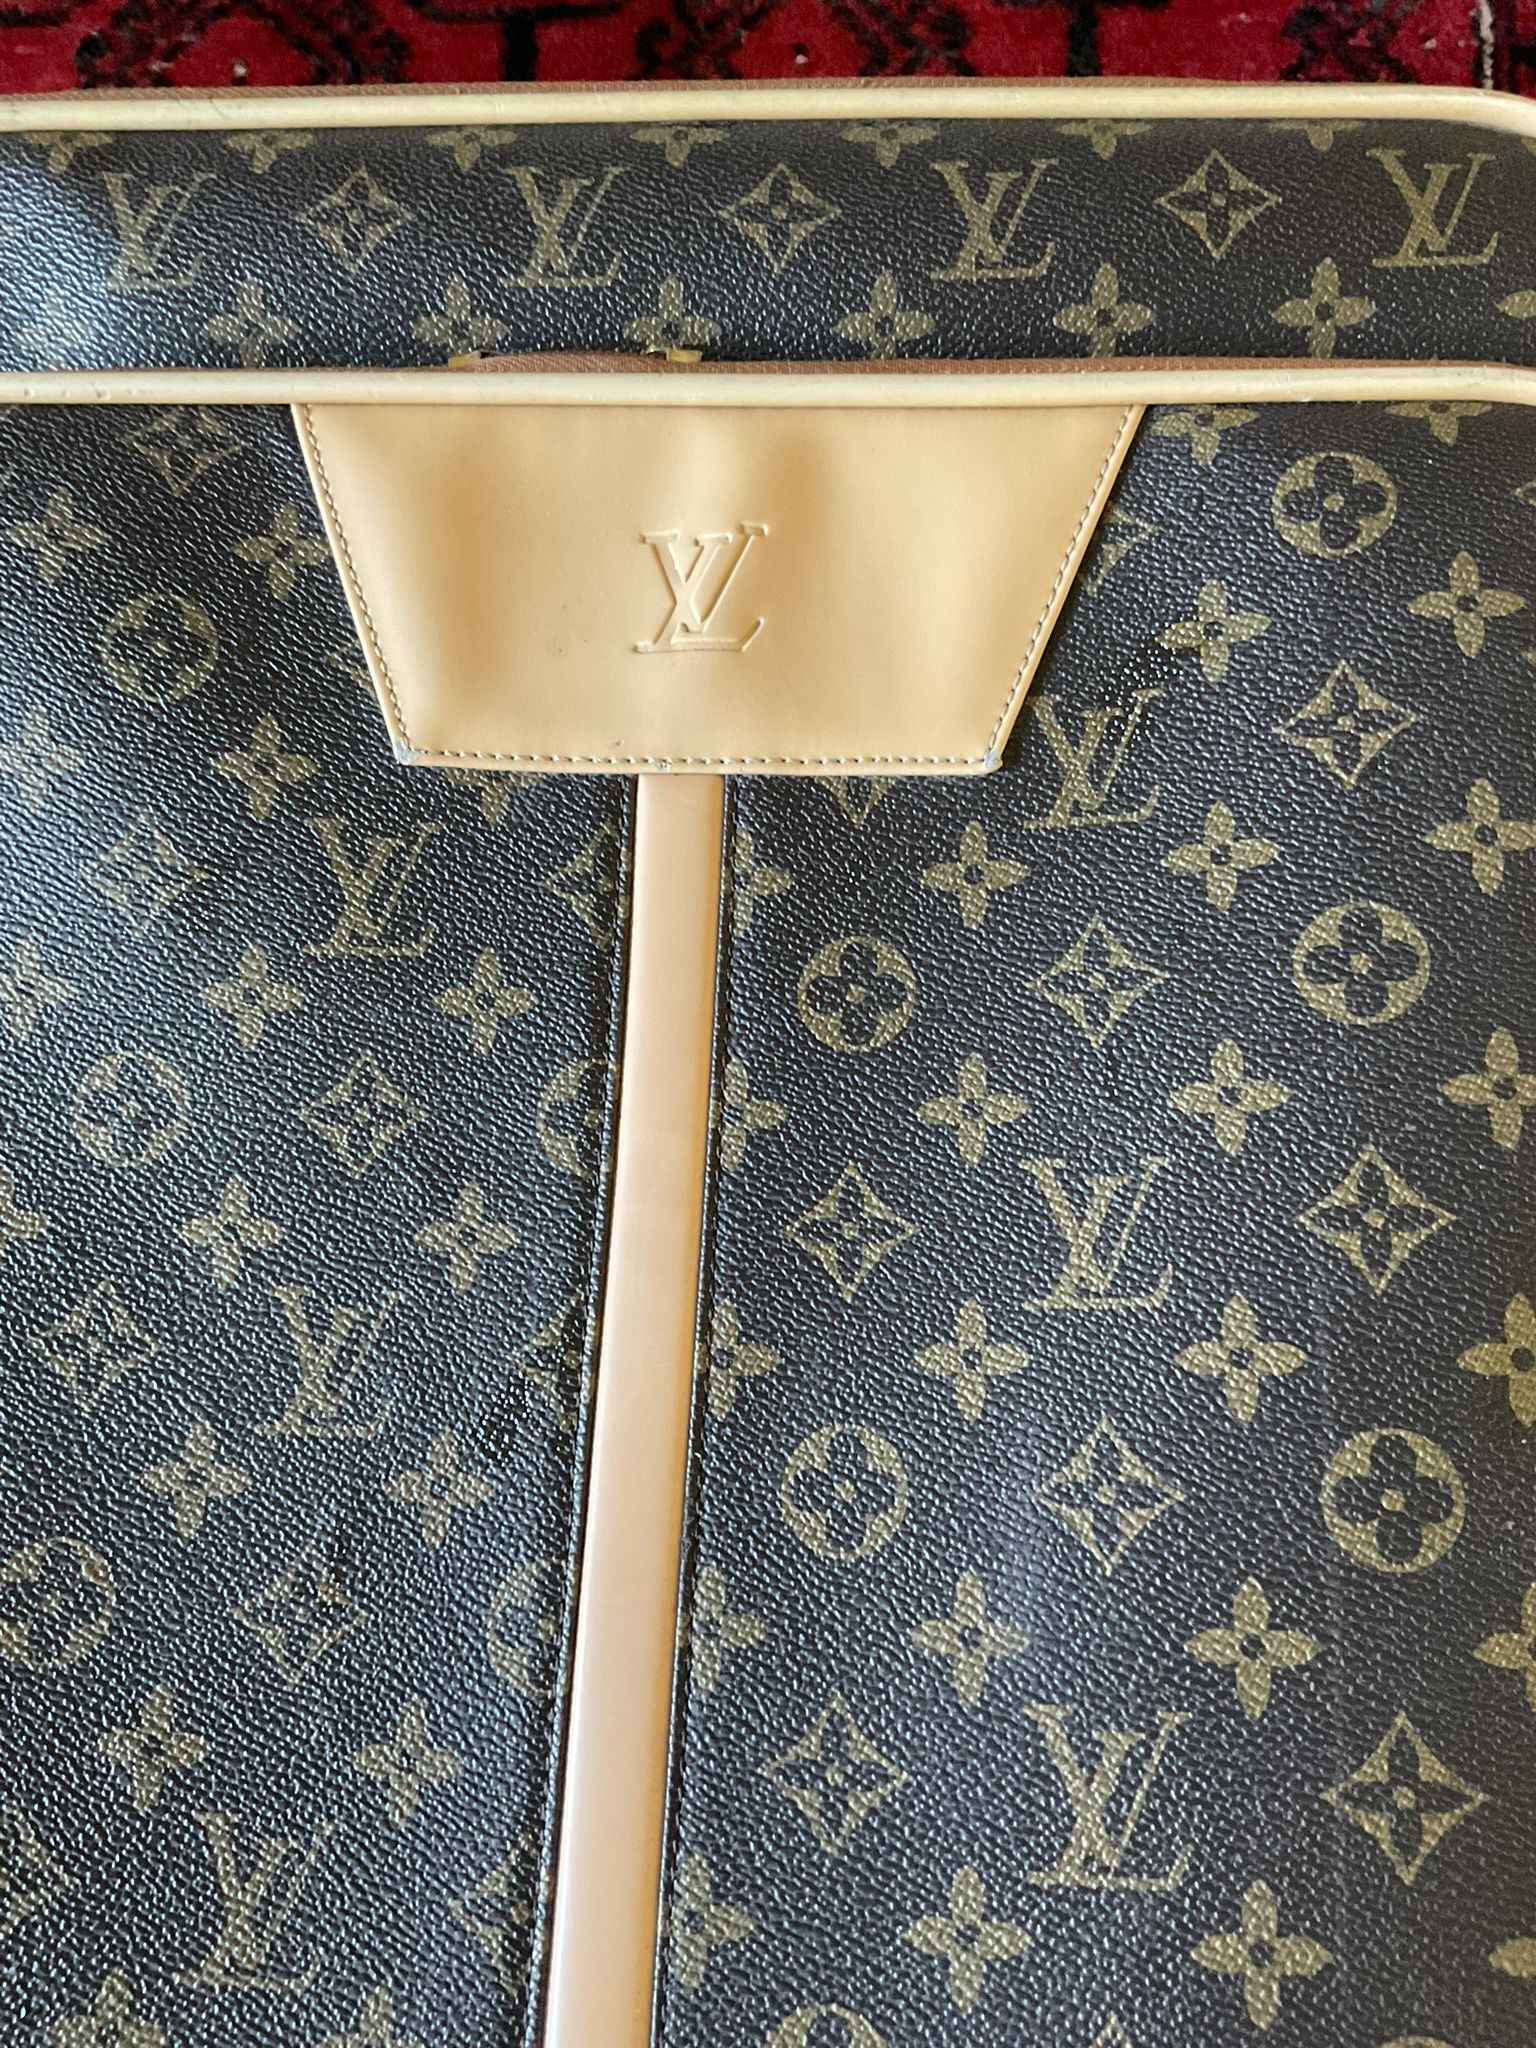 Authentic Louis Vuitton Carry On Luggage for Sale in Stanton, CA